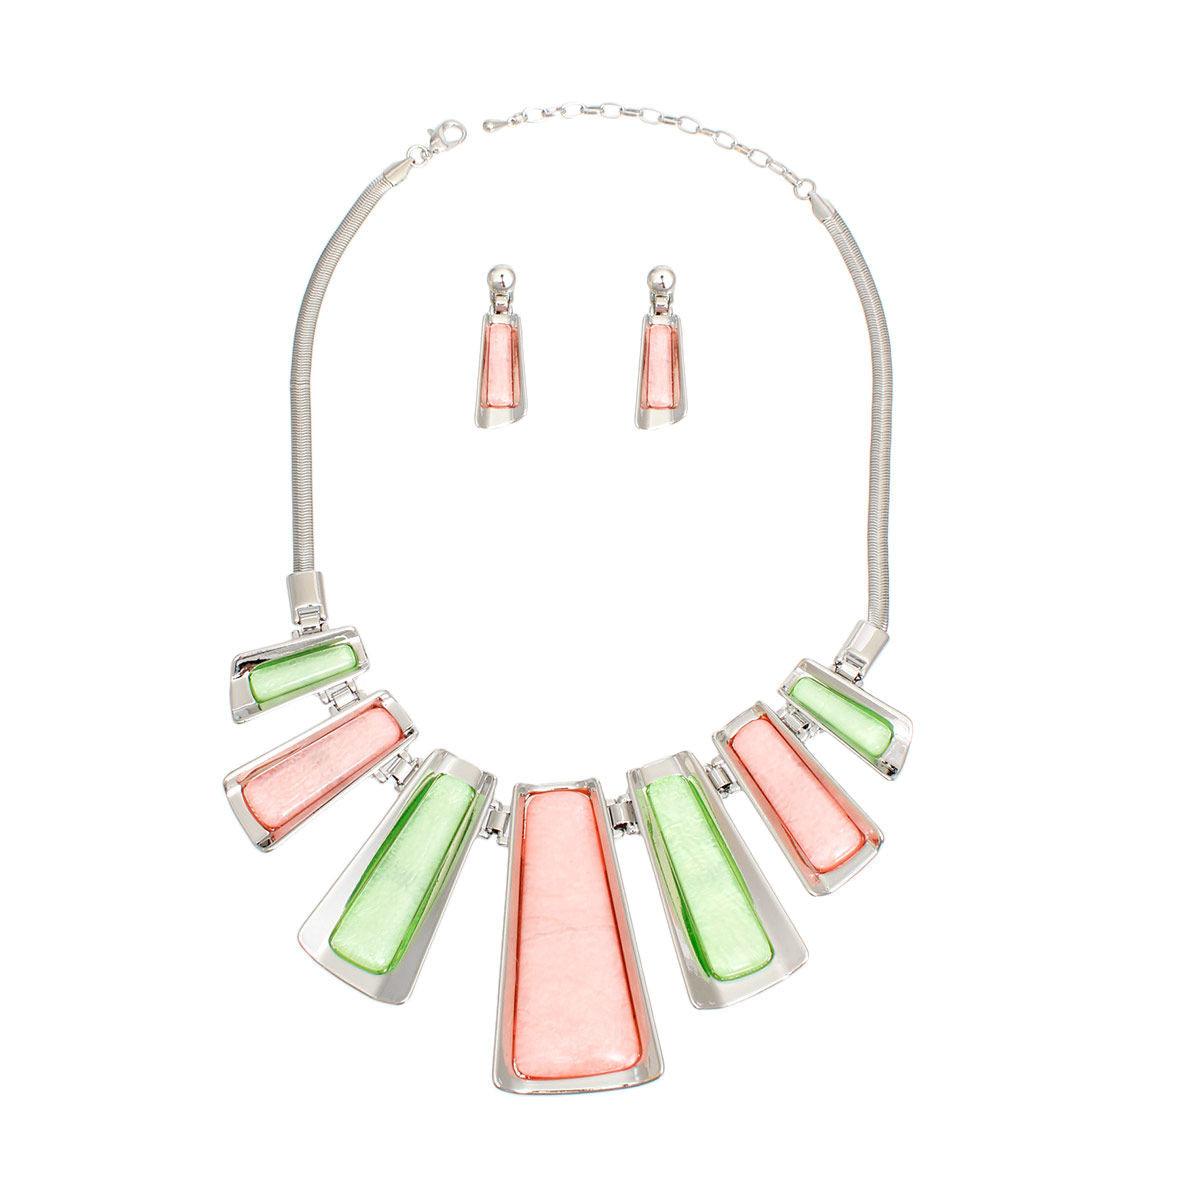 AKA Necklace Pink Green Silver Chain Set for Women